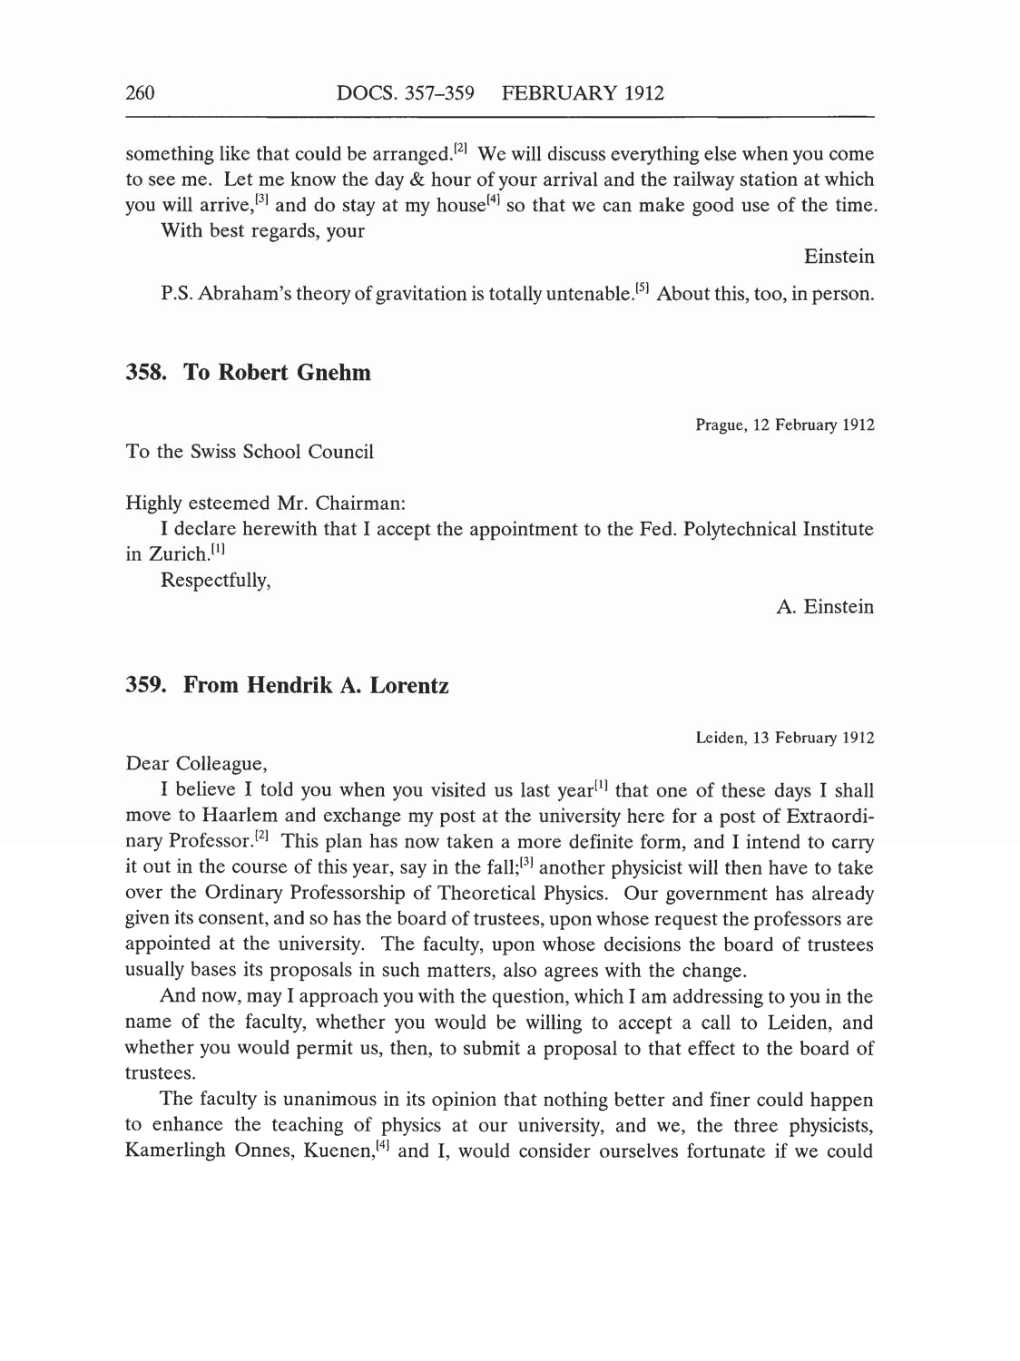 Volume 5: The Swiss Years: Correspondence, 1902-1914 (English translation supplement) page 260